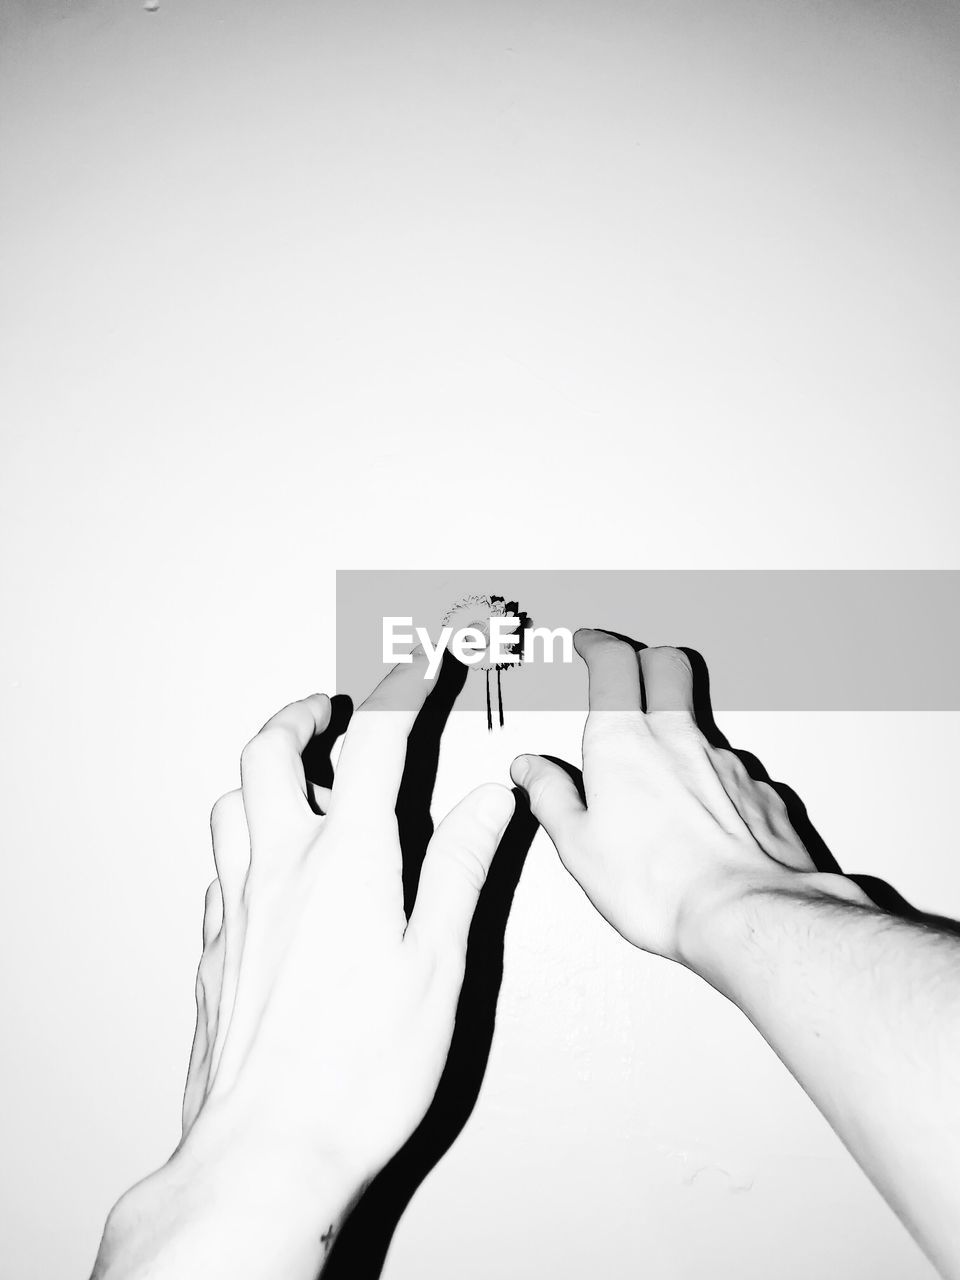 Cropped image of hands reaching flower against white background